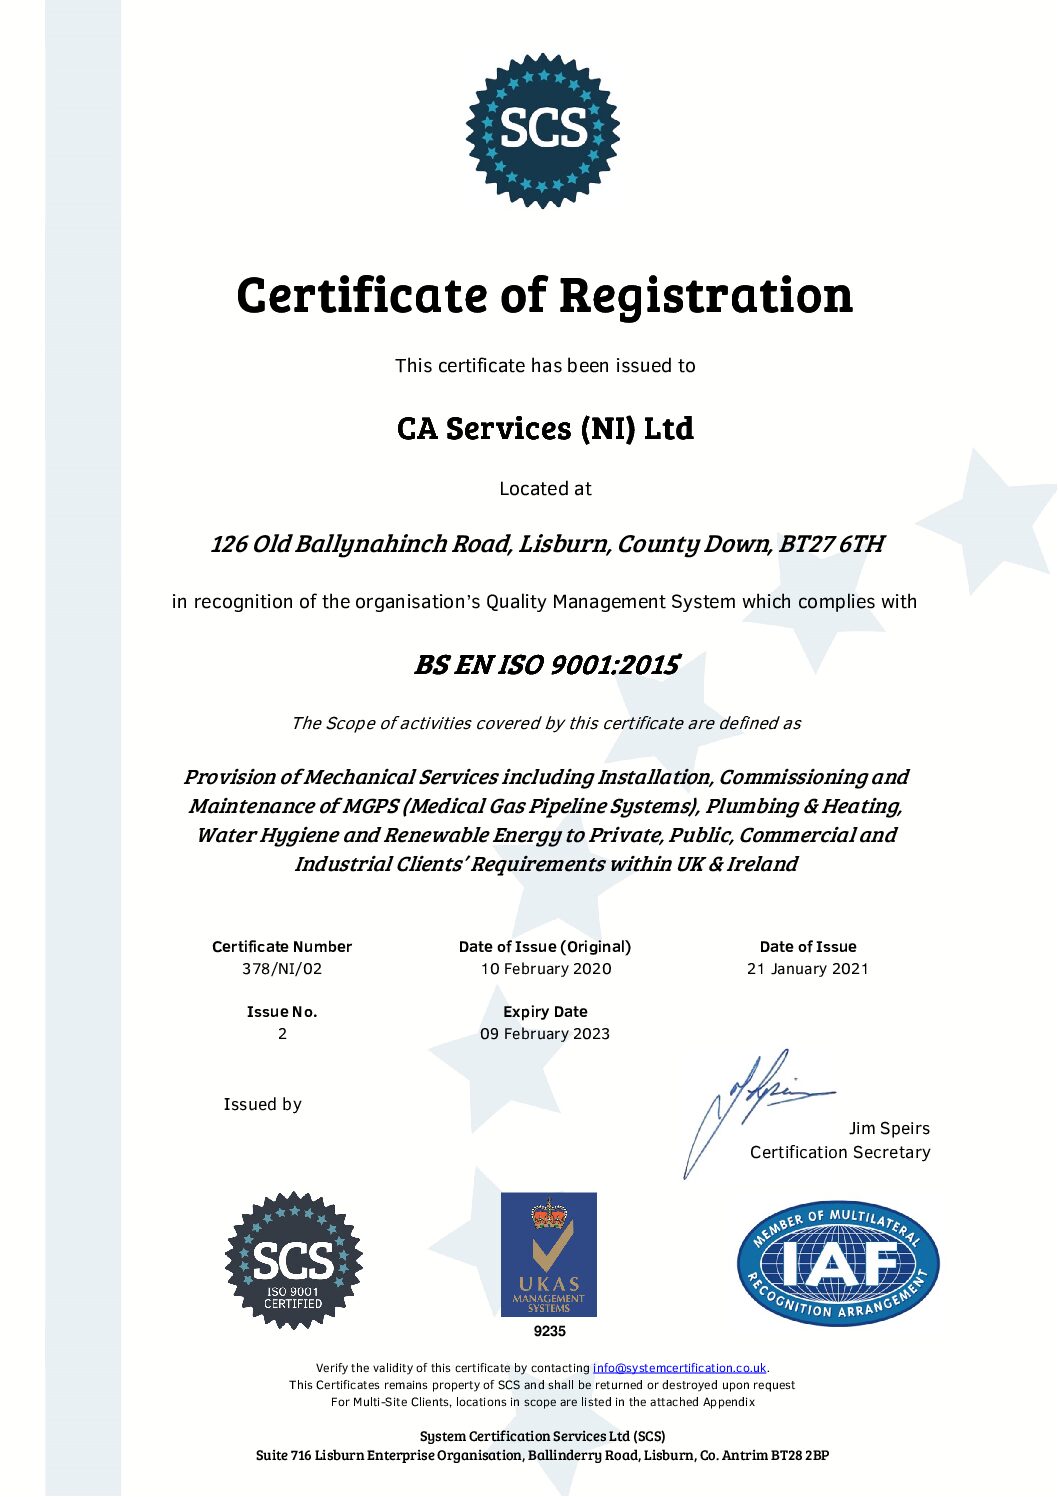 CA Services maintain their ISO 9001:2015